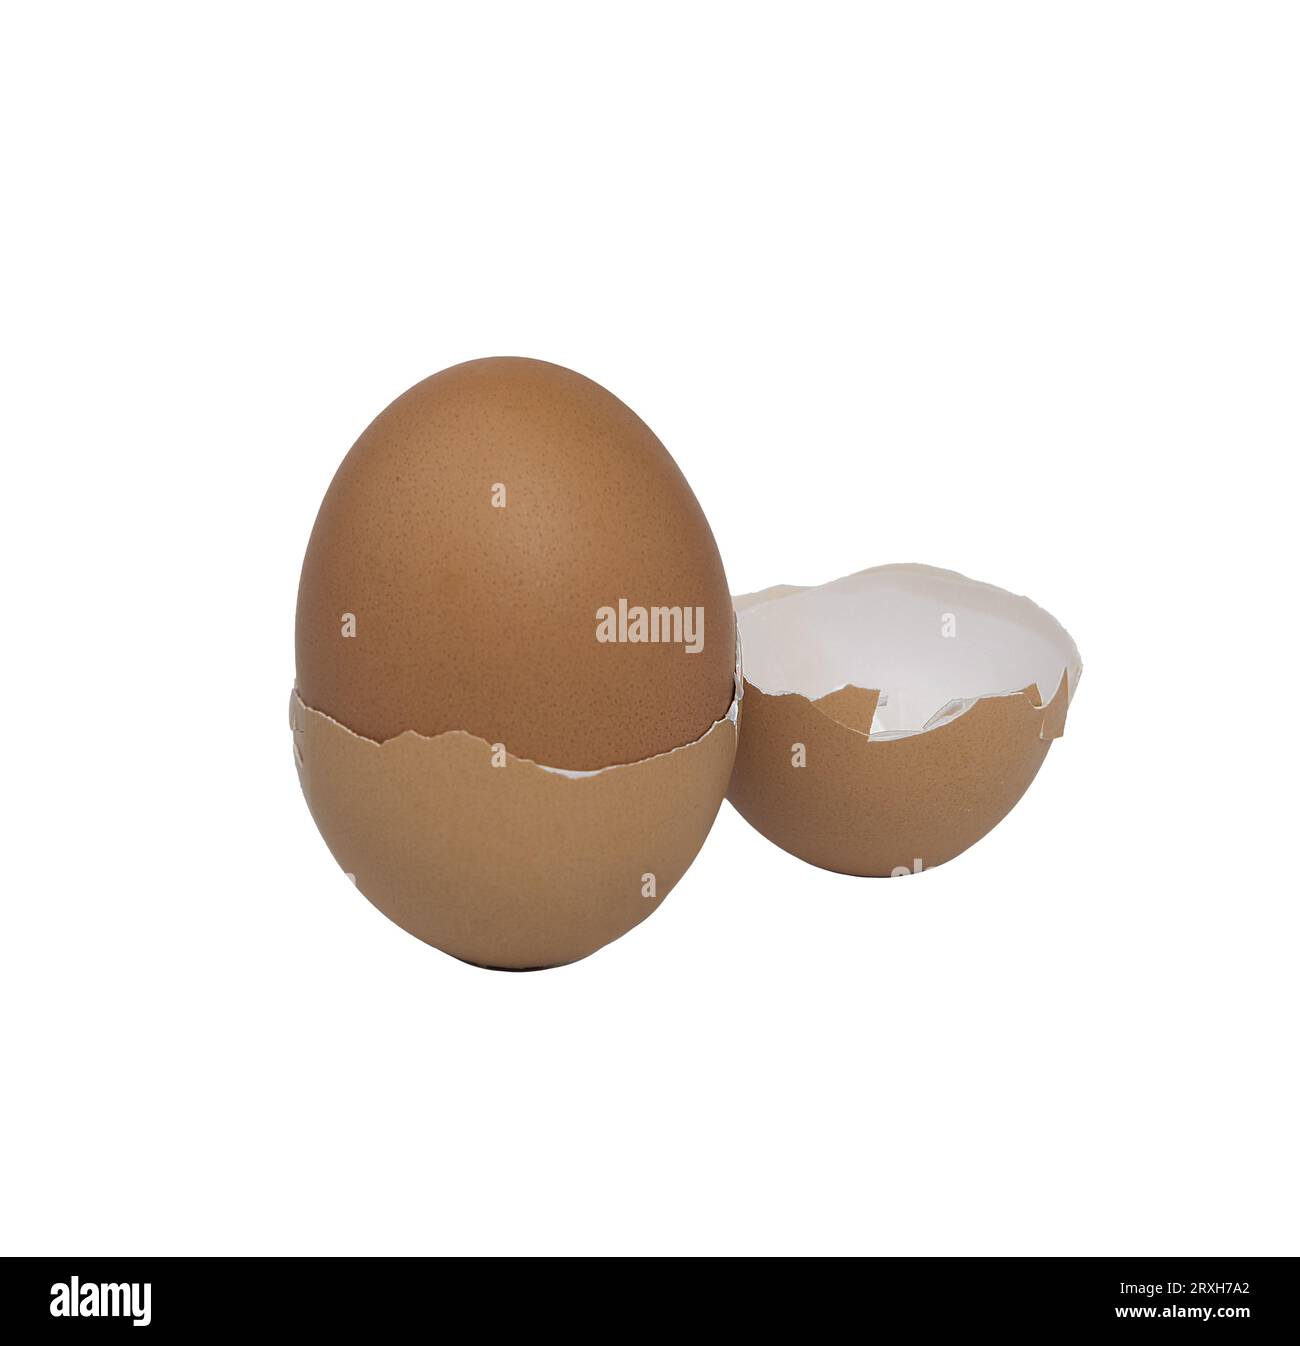 the double shell of an egg on a transparent background Stock Photo